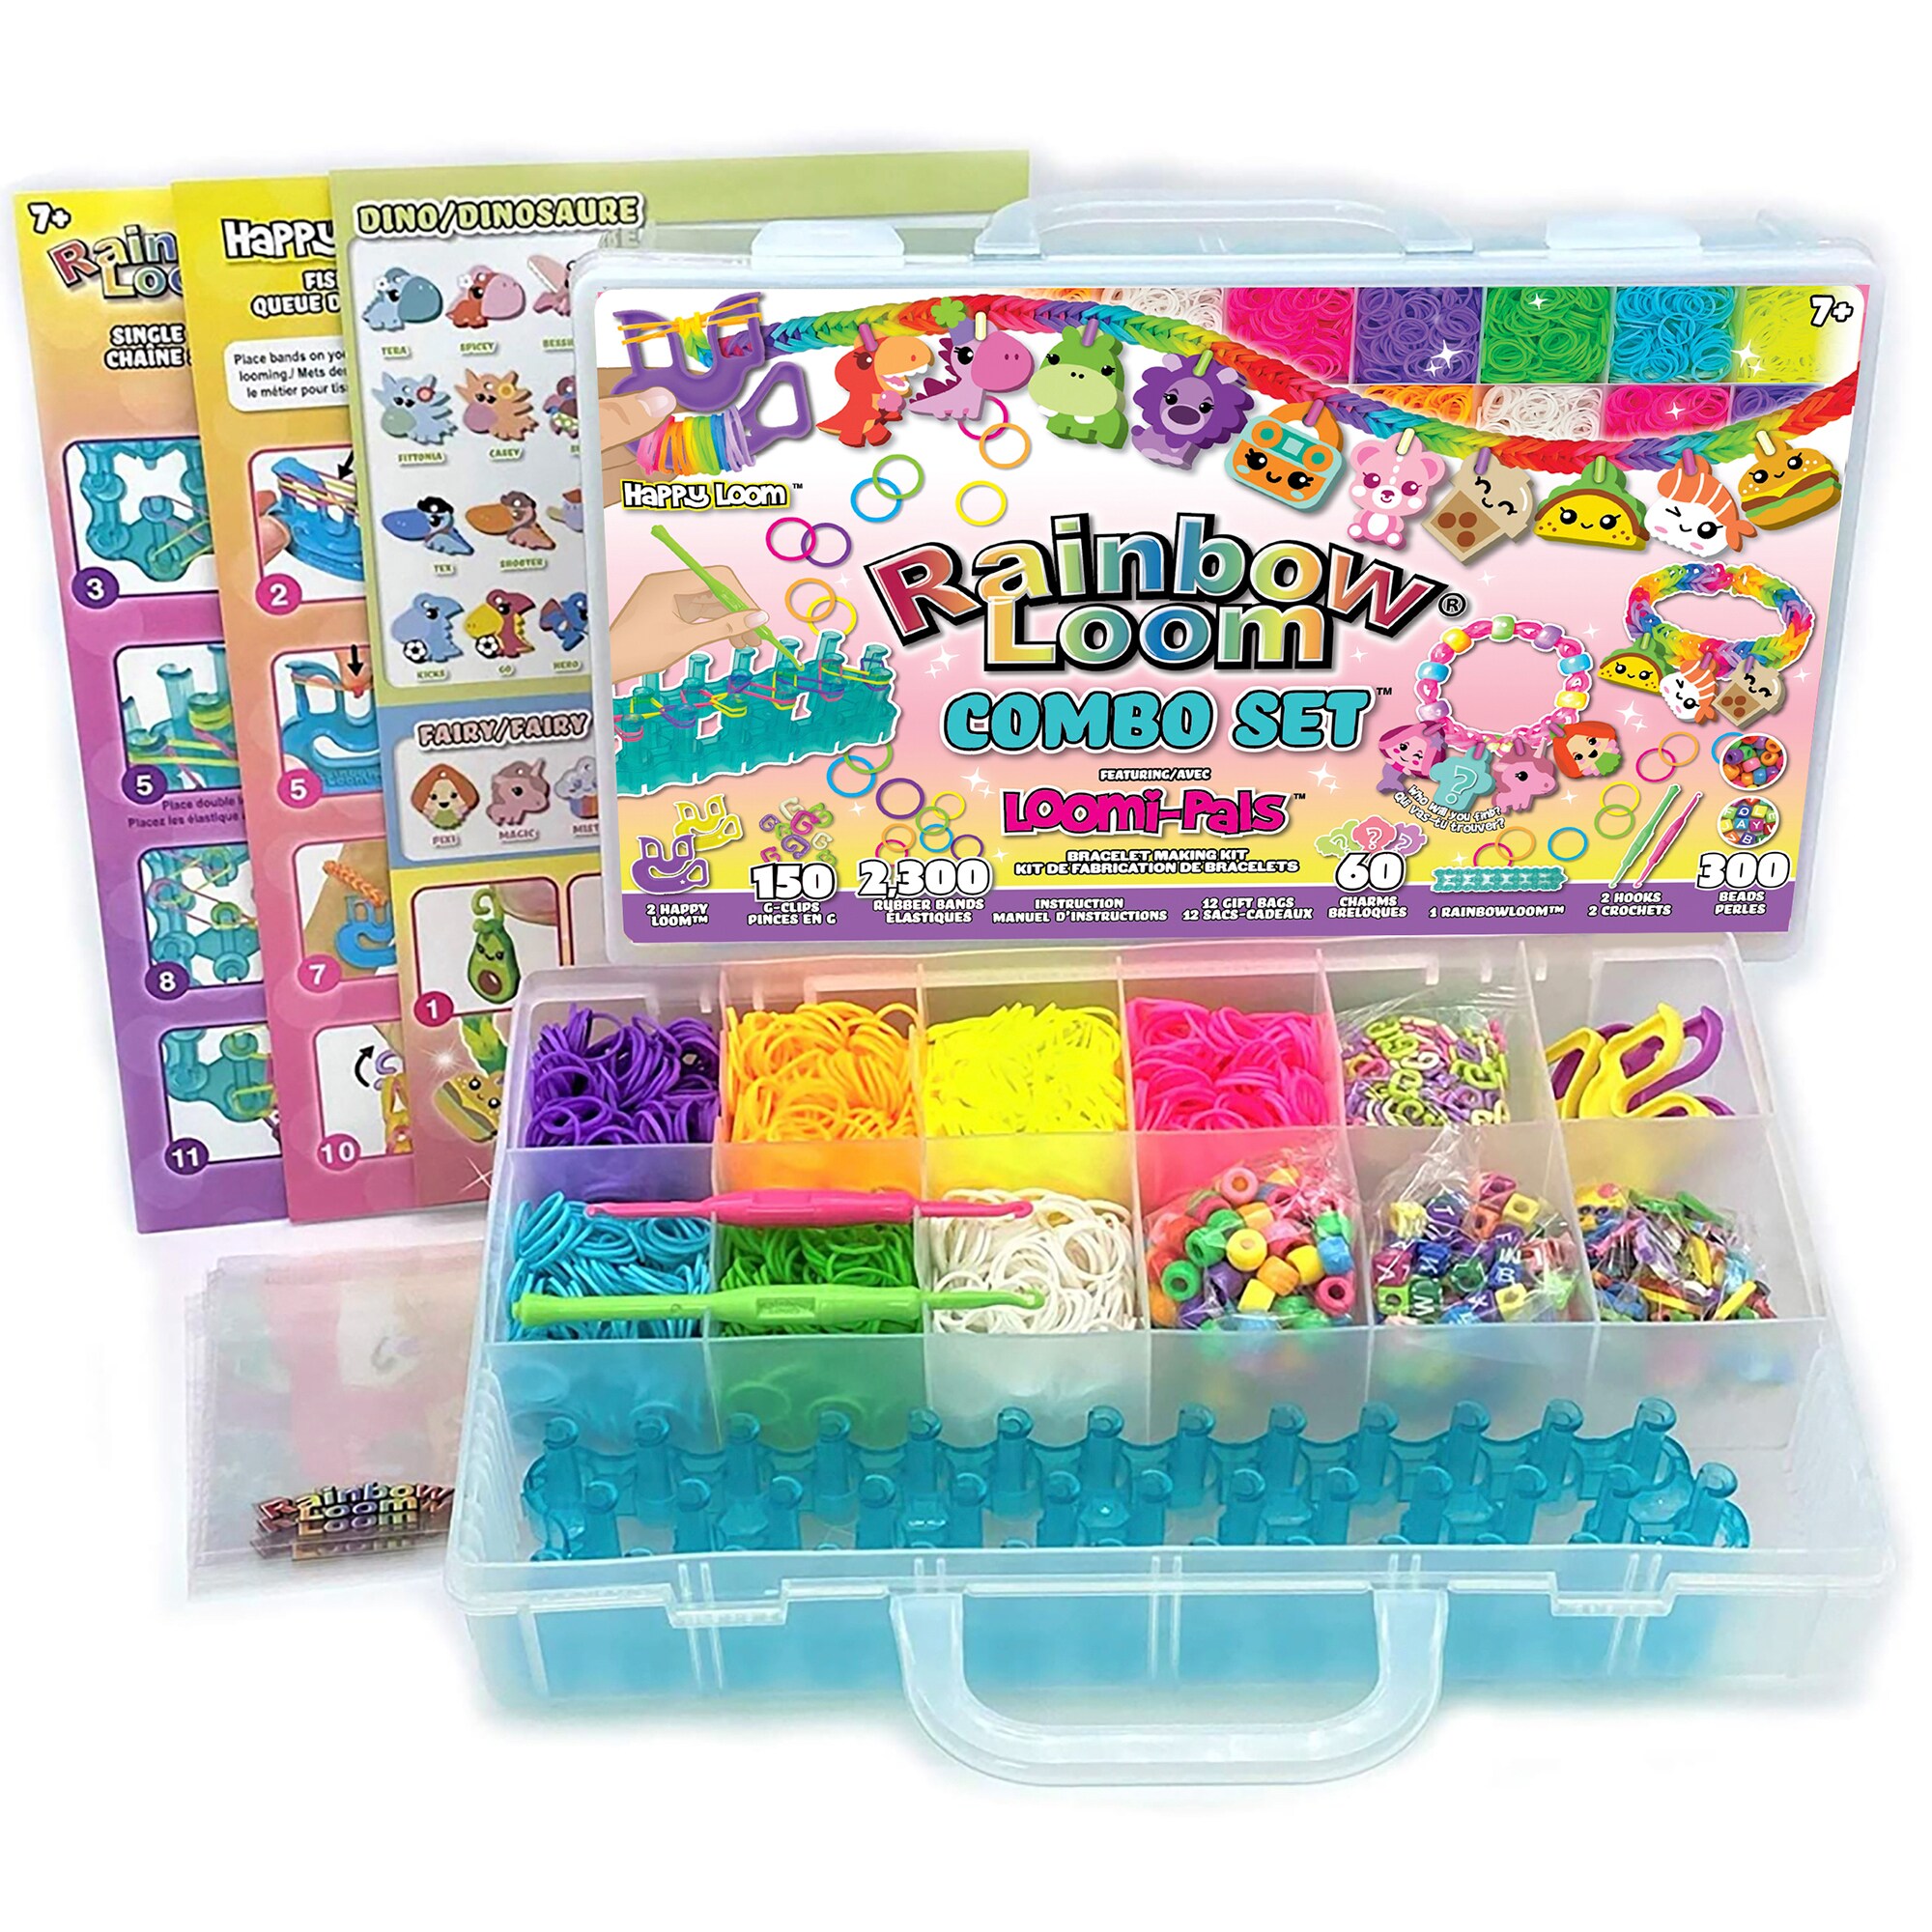  Rainbow Loom® Loomi-Pals™ Mini Combo Set, Features 60 Cute  Assorted Loomi-Pals Charms,1 Happy Loom, 2100 Colorful Bands All in a  Carrying Case for Boys and Girls 7+